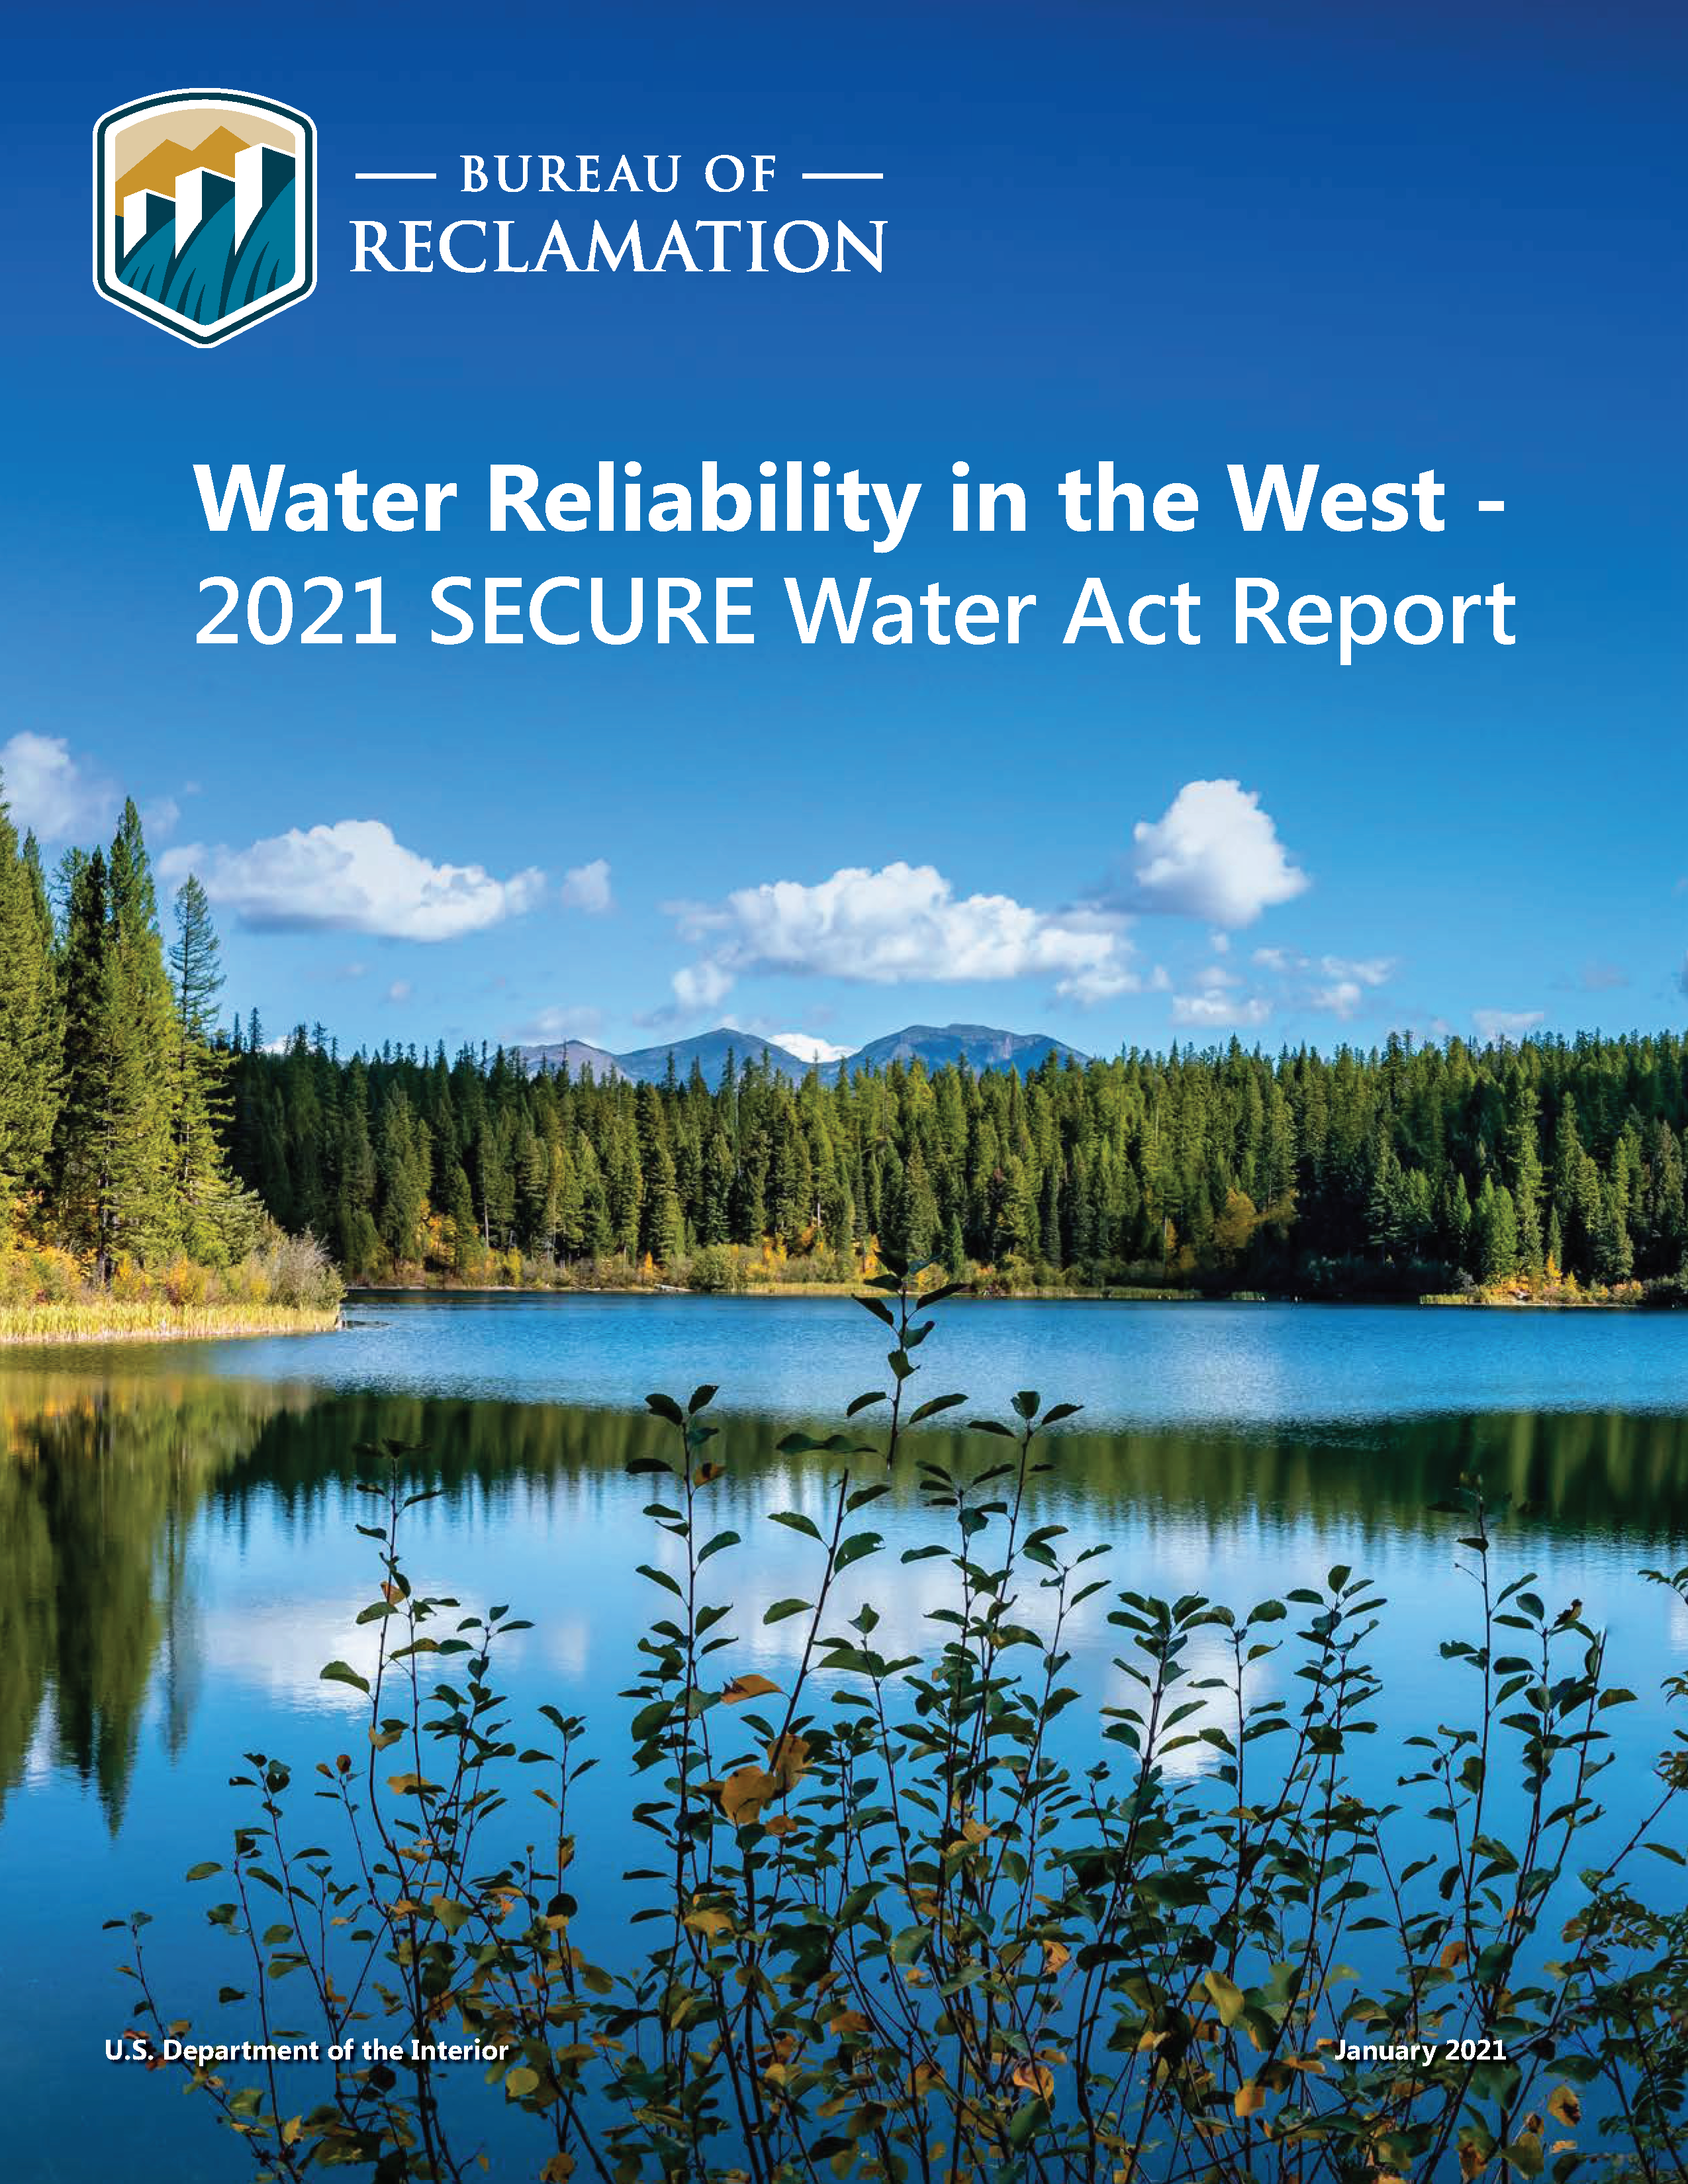 2021 SECURE Water Act Report